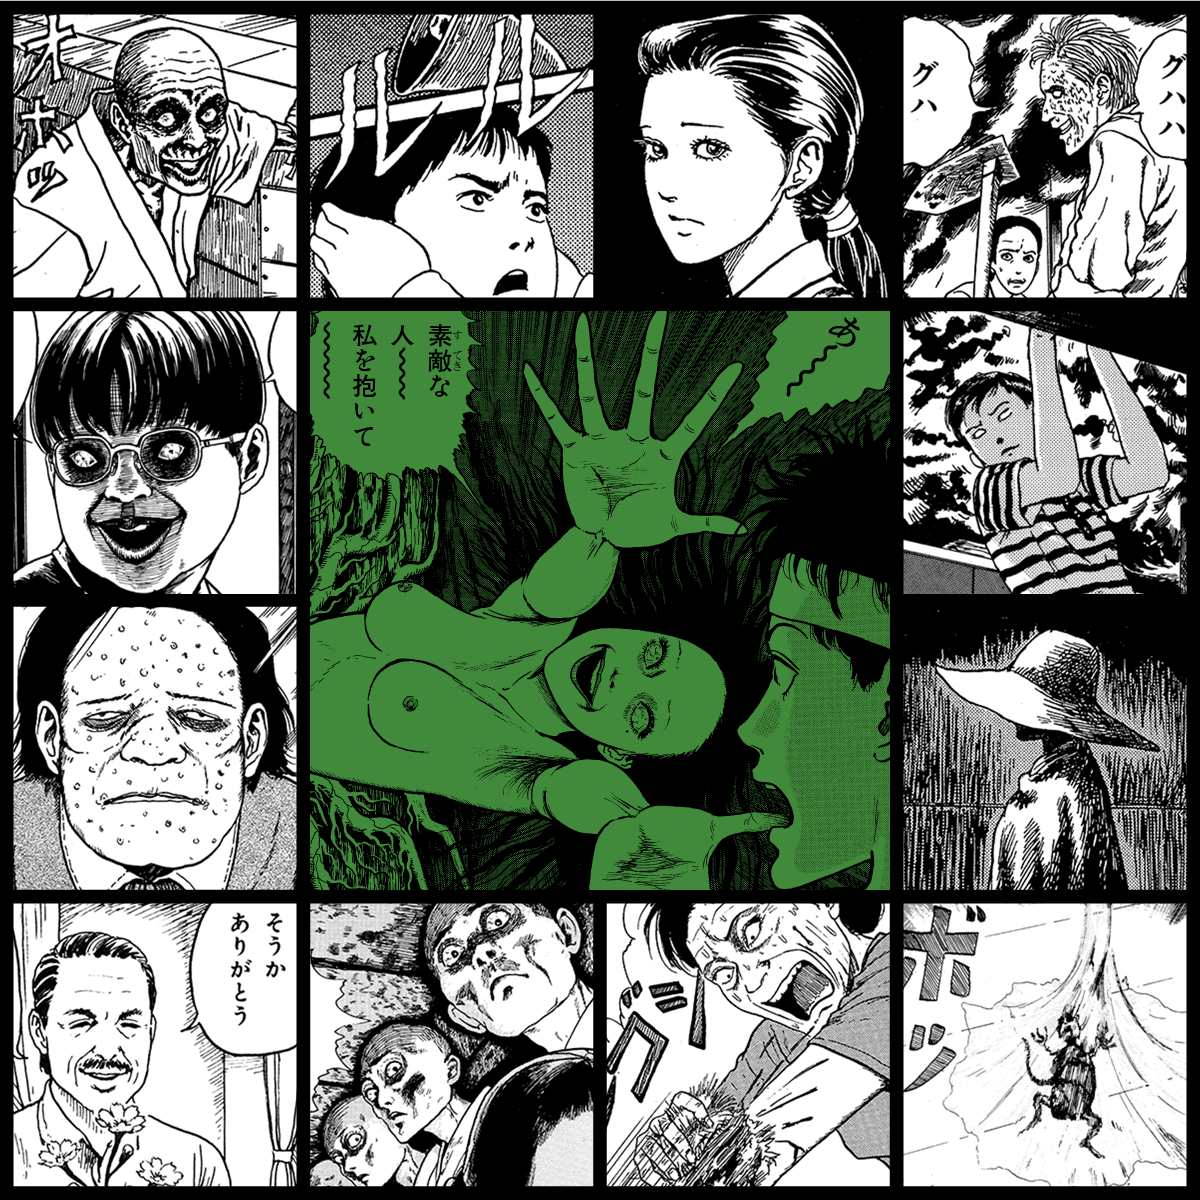 TOMIE by Junji Ito #1771